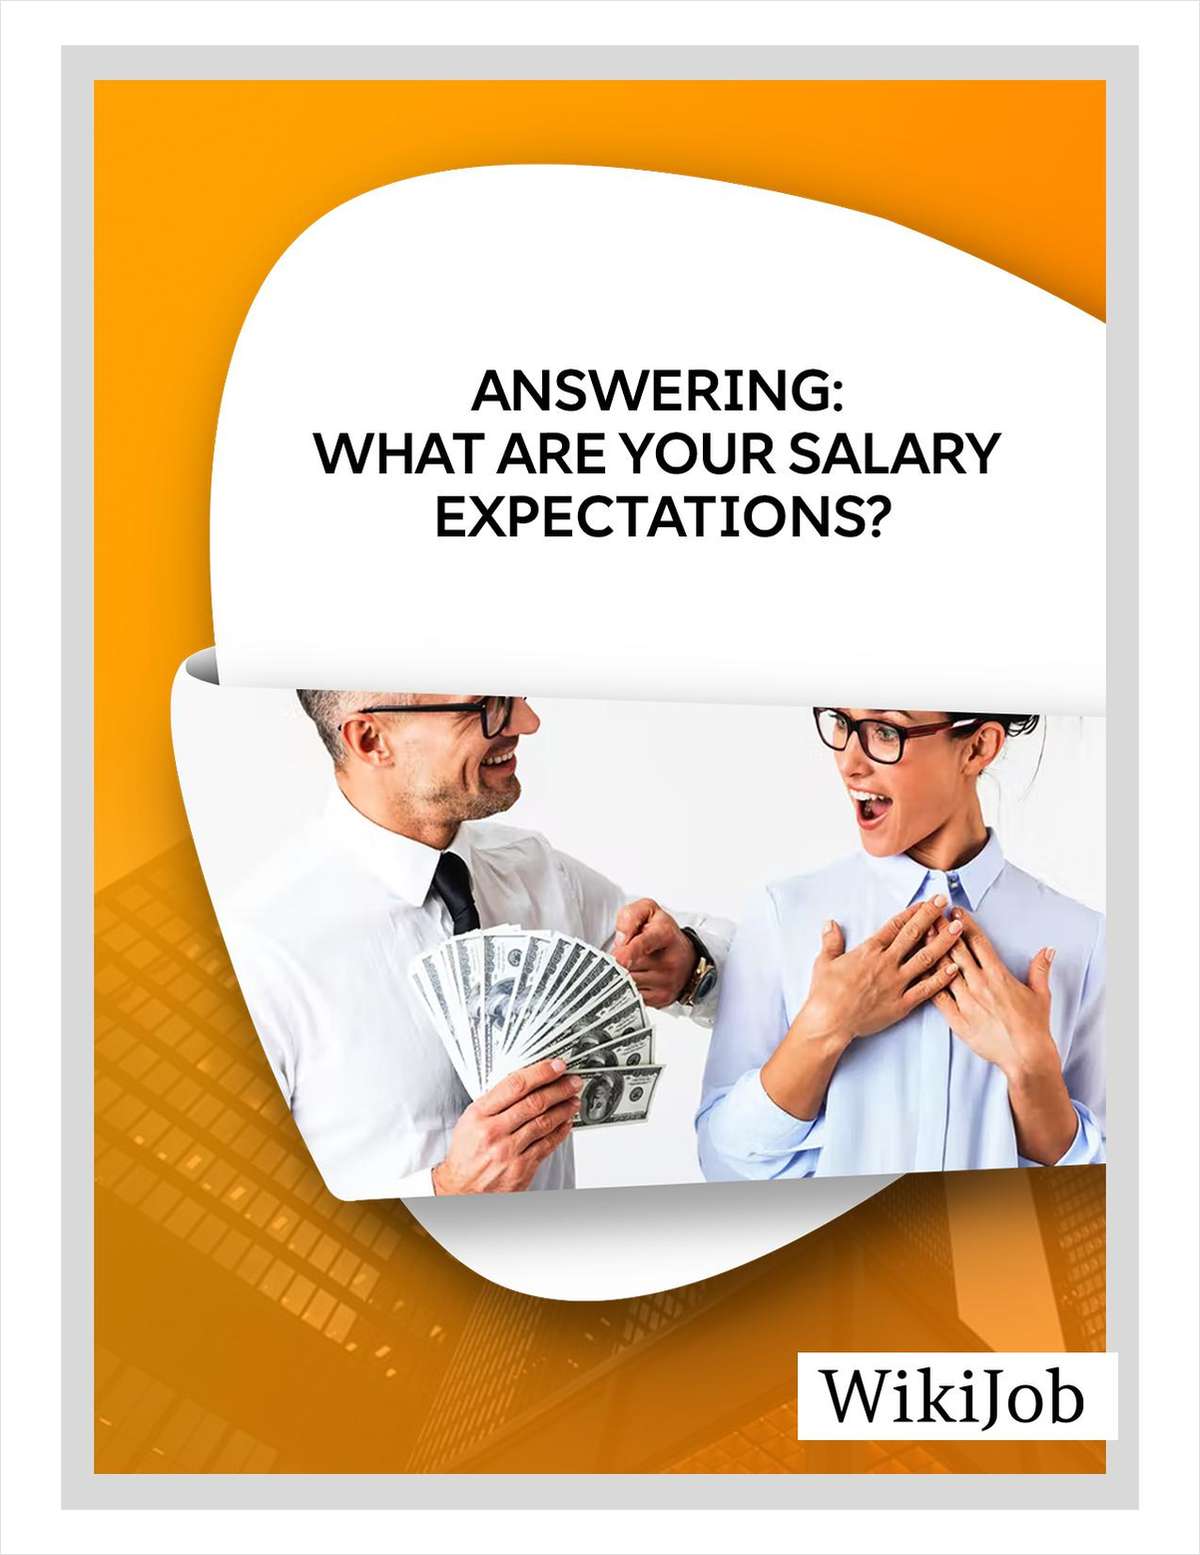 Answering: What Are Your Salary Expectations?